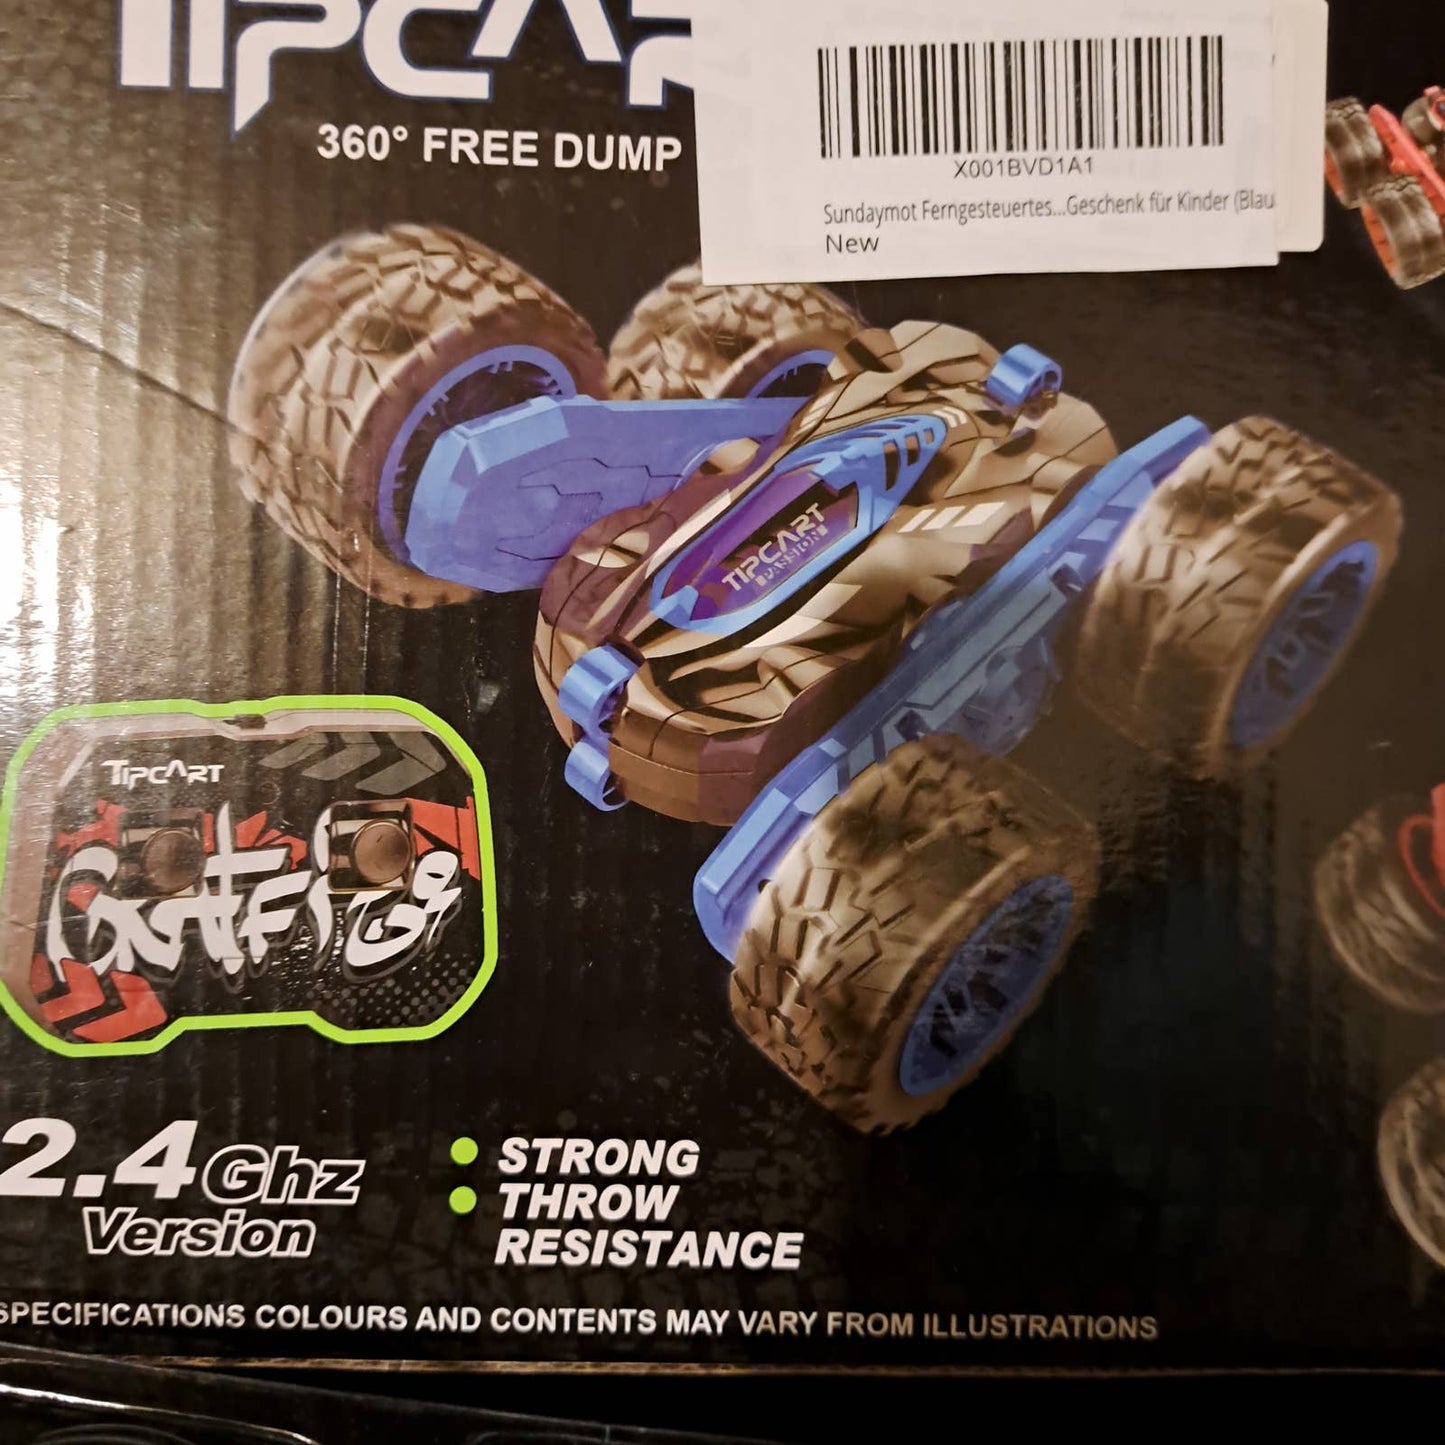 NIB - TWO New STUNT RC CARS - Drive and Flip Style Great gifts